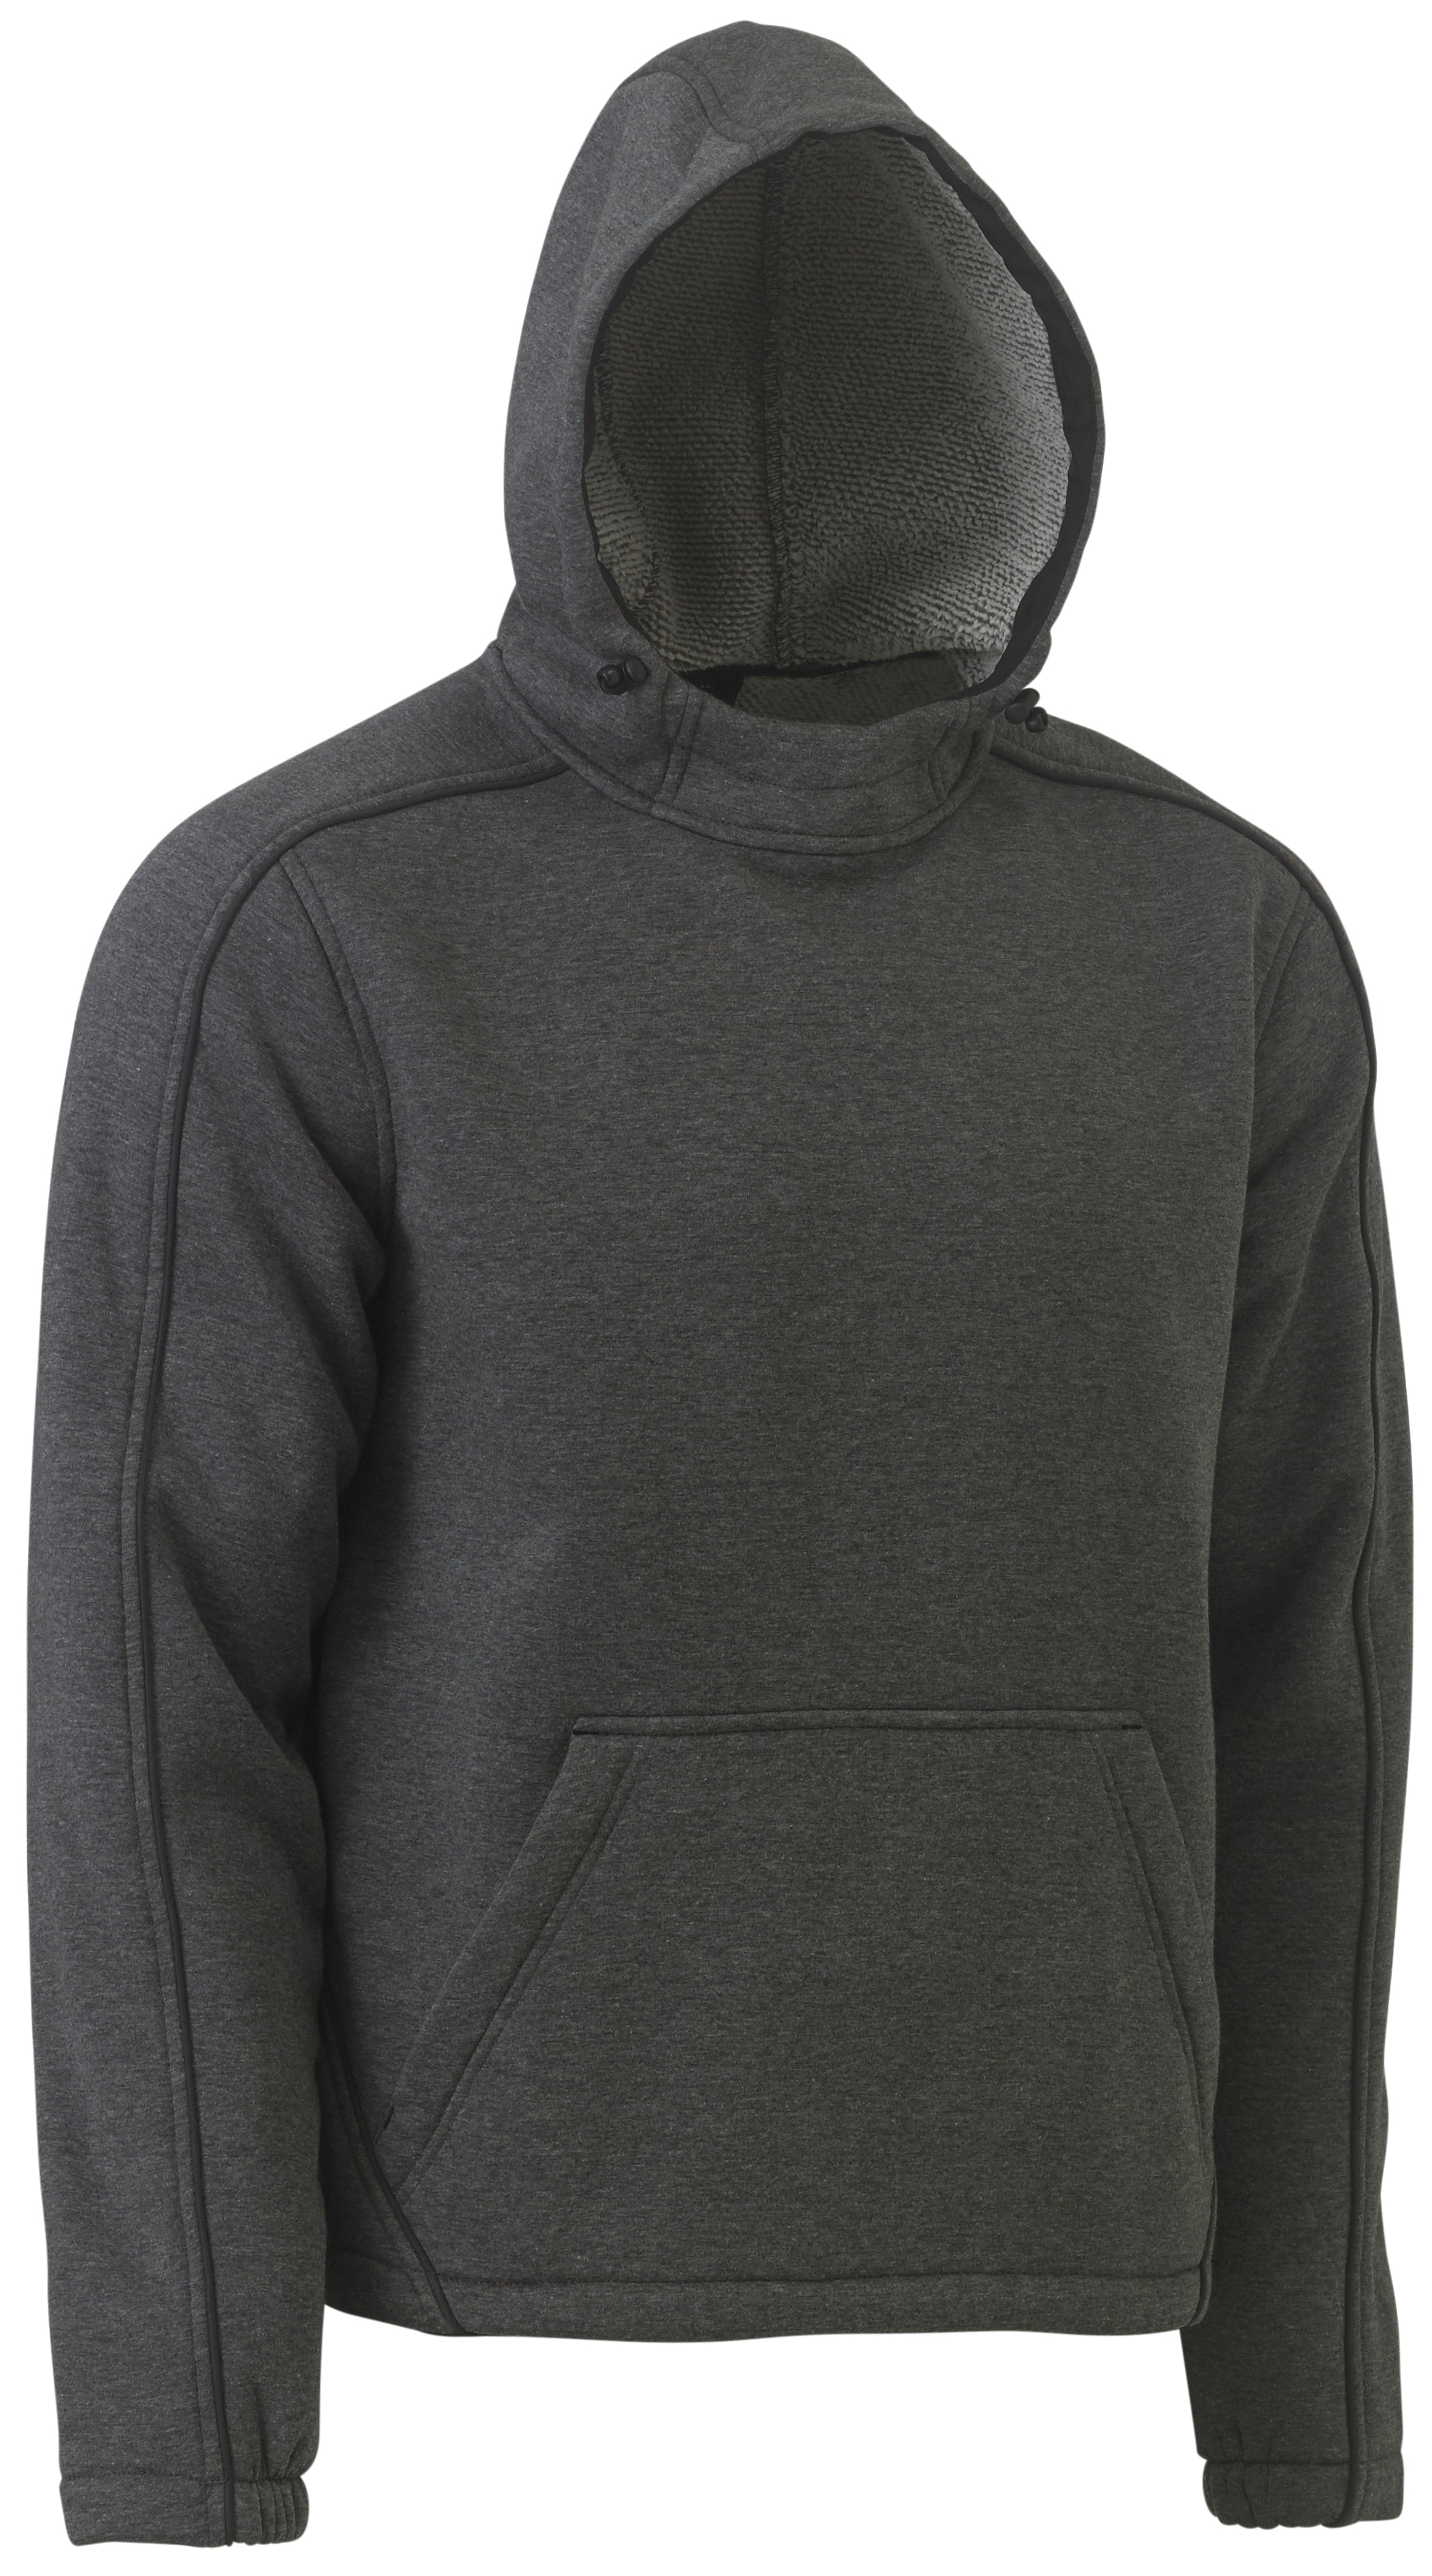 FLX AND MOVE™ MARLE FLEECE HOODIE JUMPER